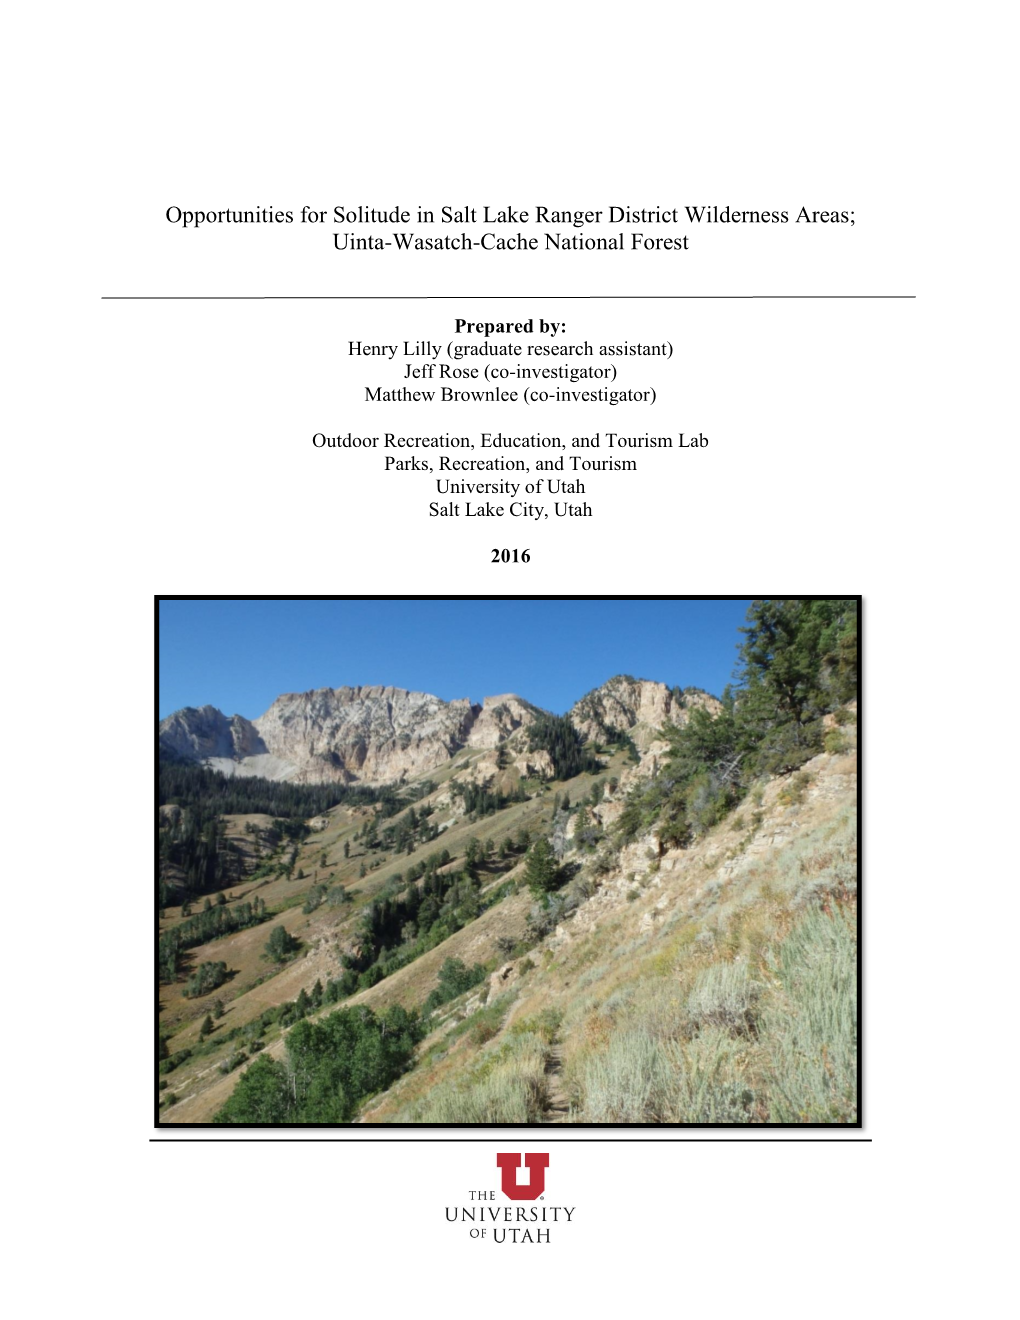 Opportunities for Solitude in Salt Lake Ranger District Wilderness Areas; Uinta-Wasatch-Cache National Forest